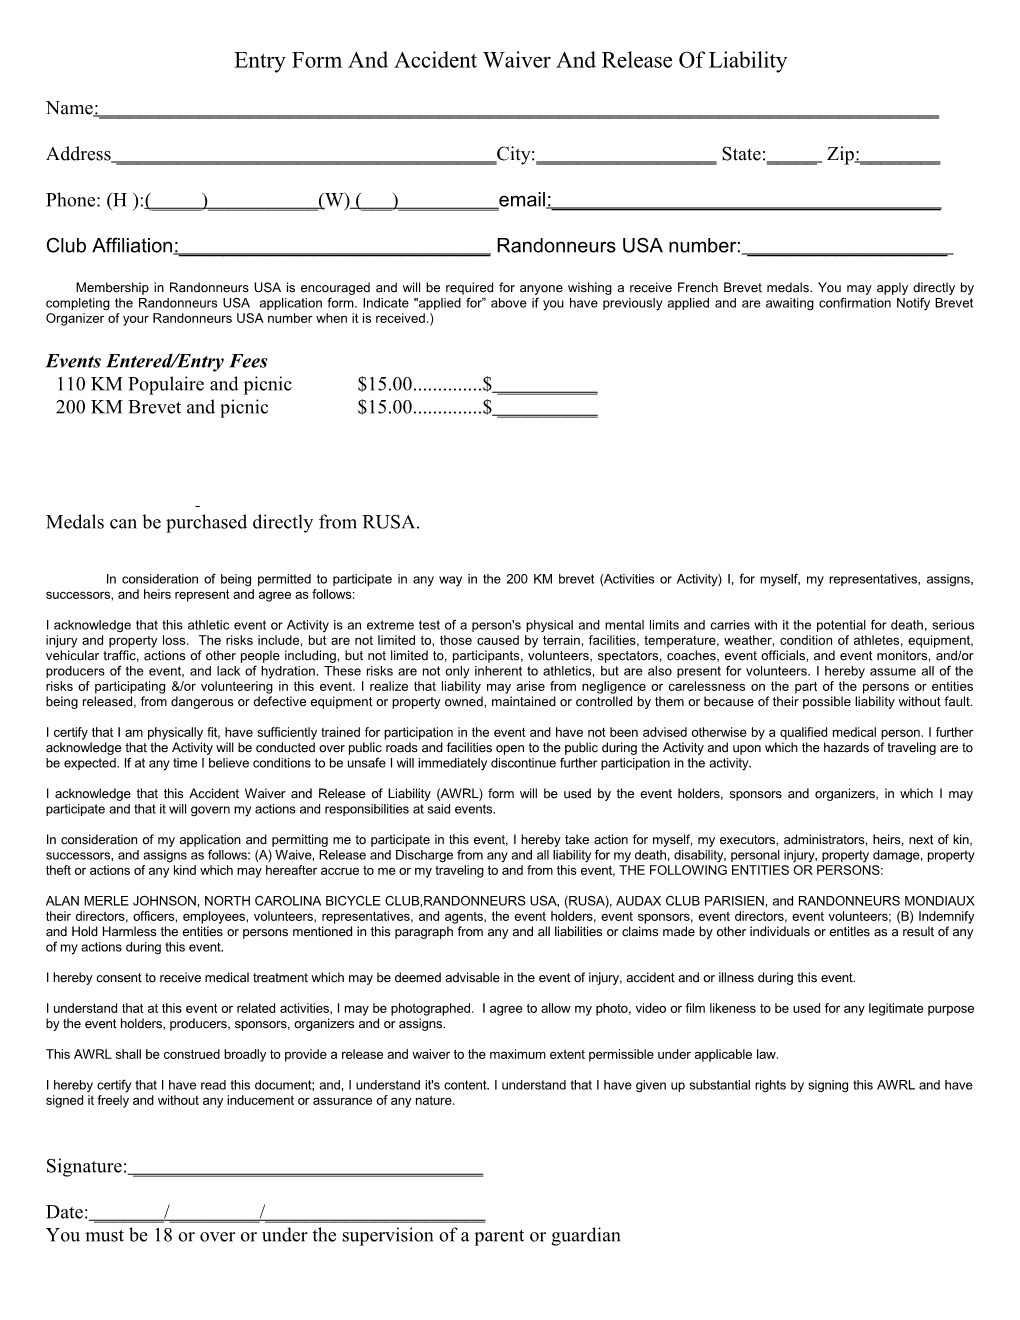 Entry Form and Accident Waiver and Release of Liability